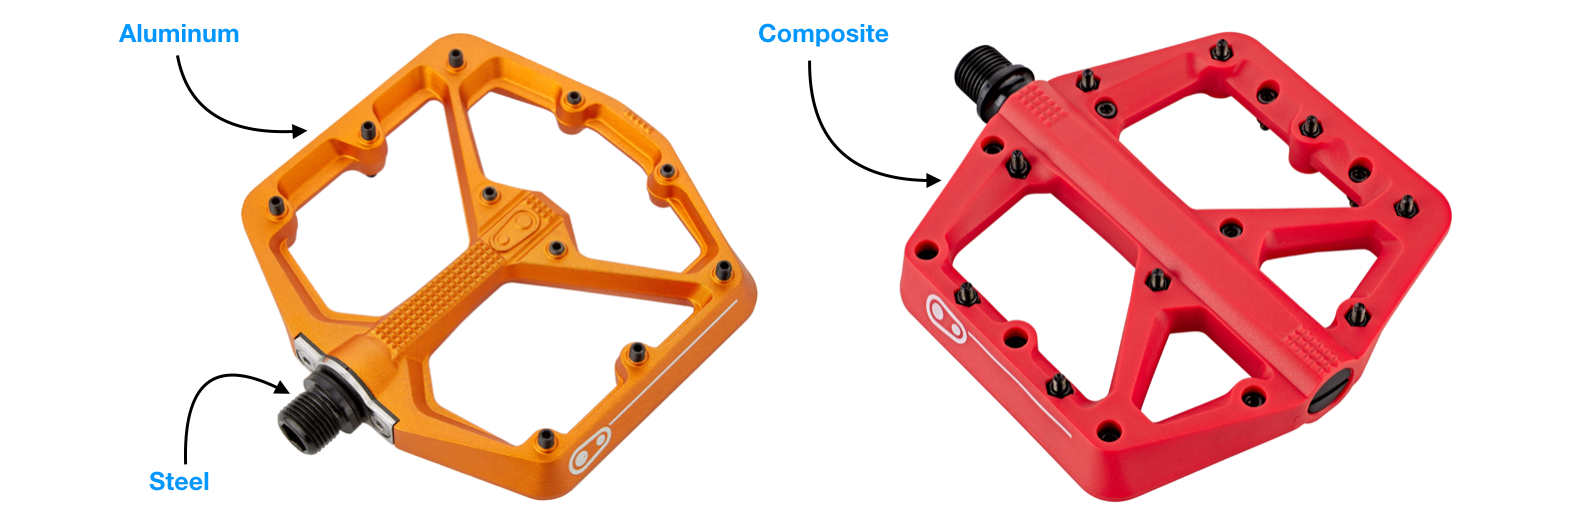 MTB Flat Pedals Buyer's Guide - Worldwide Cyclery